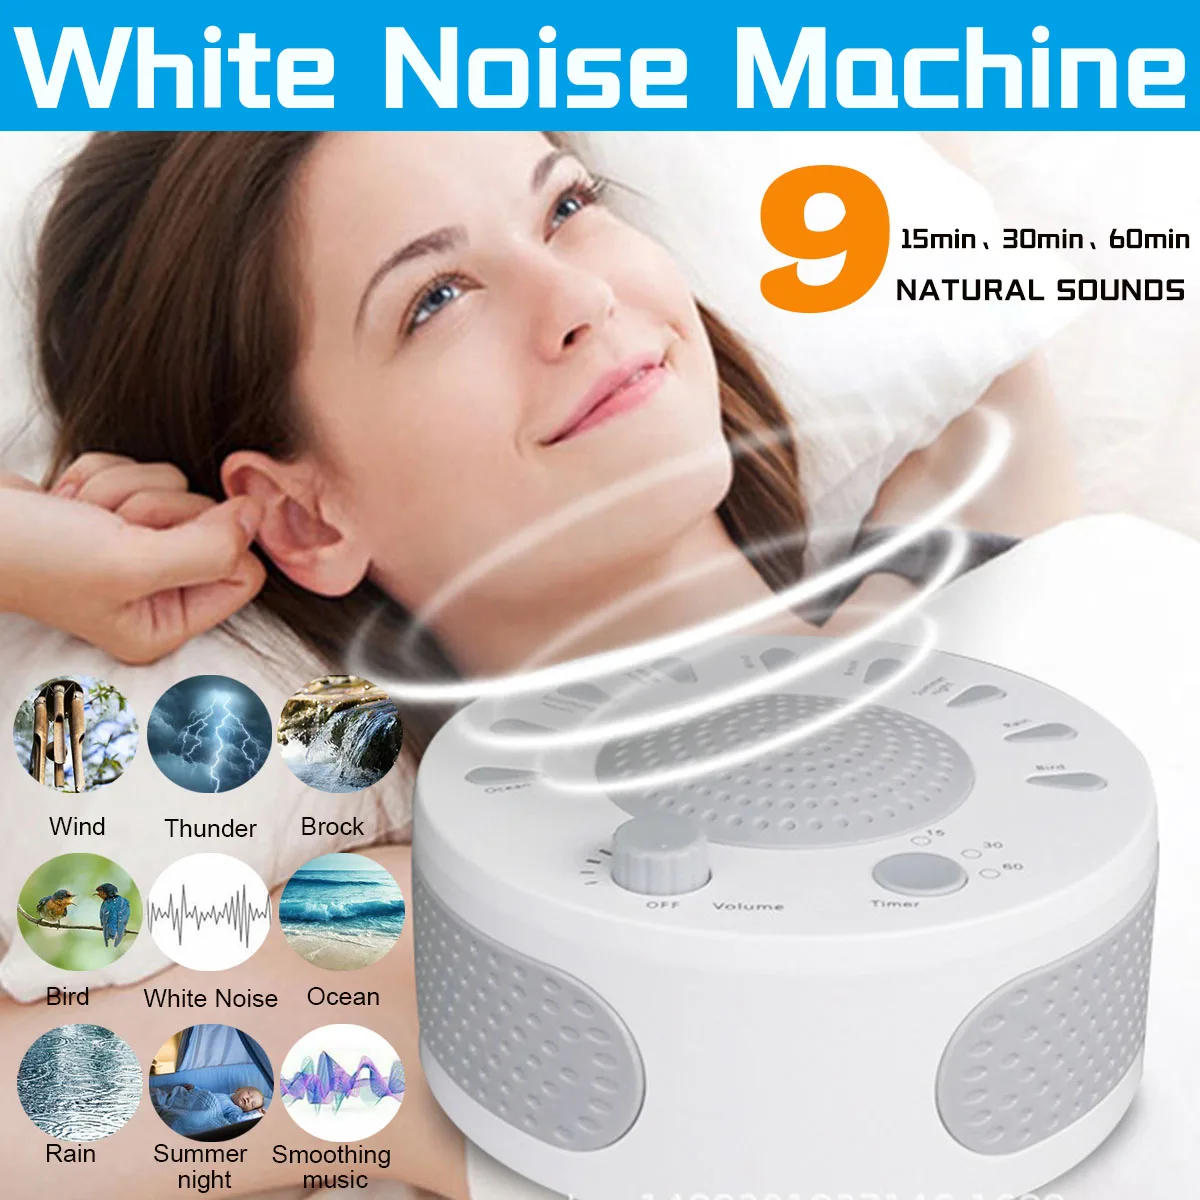 Sound Machine Baby Portable for Sleeping with 26 Non-Looping Soothing Sounds 3 Timer Settings USB/AC or Battery Powered for Kids and Adult APUNOL White Noise Machine 